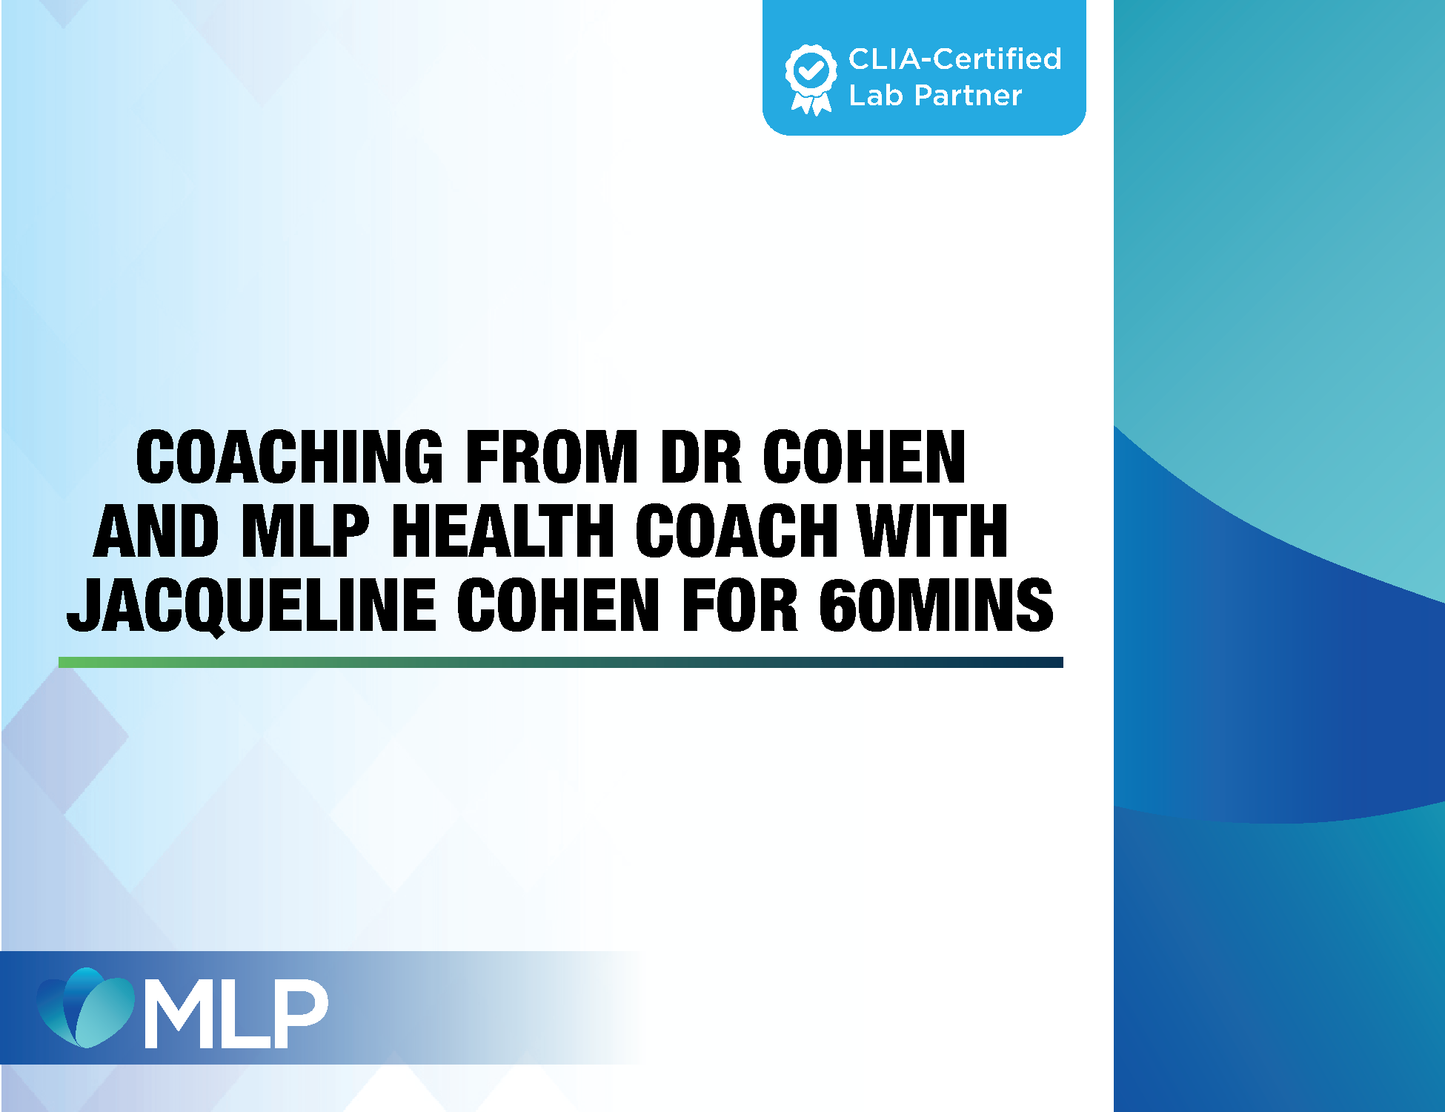 Dr Cohen and MPL Health Coach with Jacqueline Cohen for 60 mins